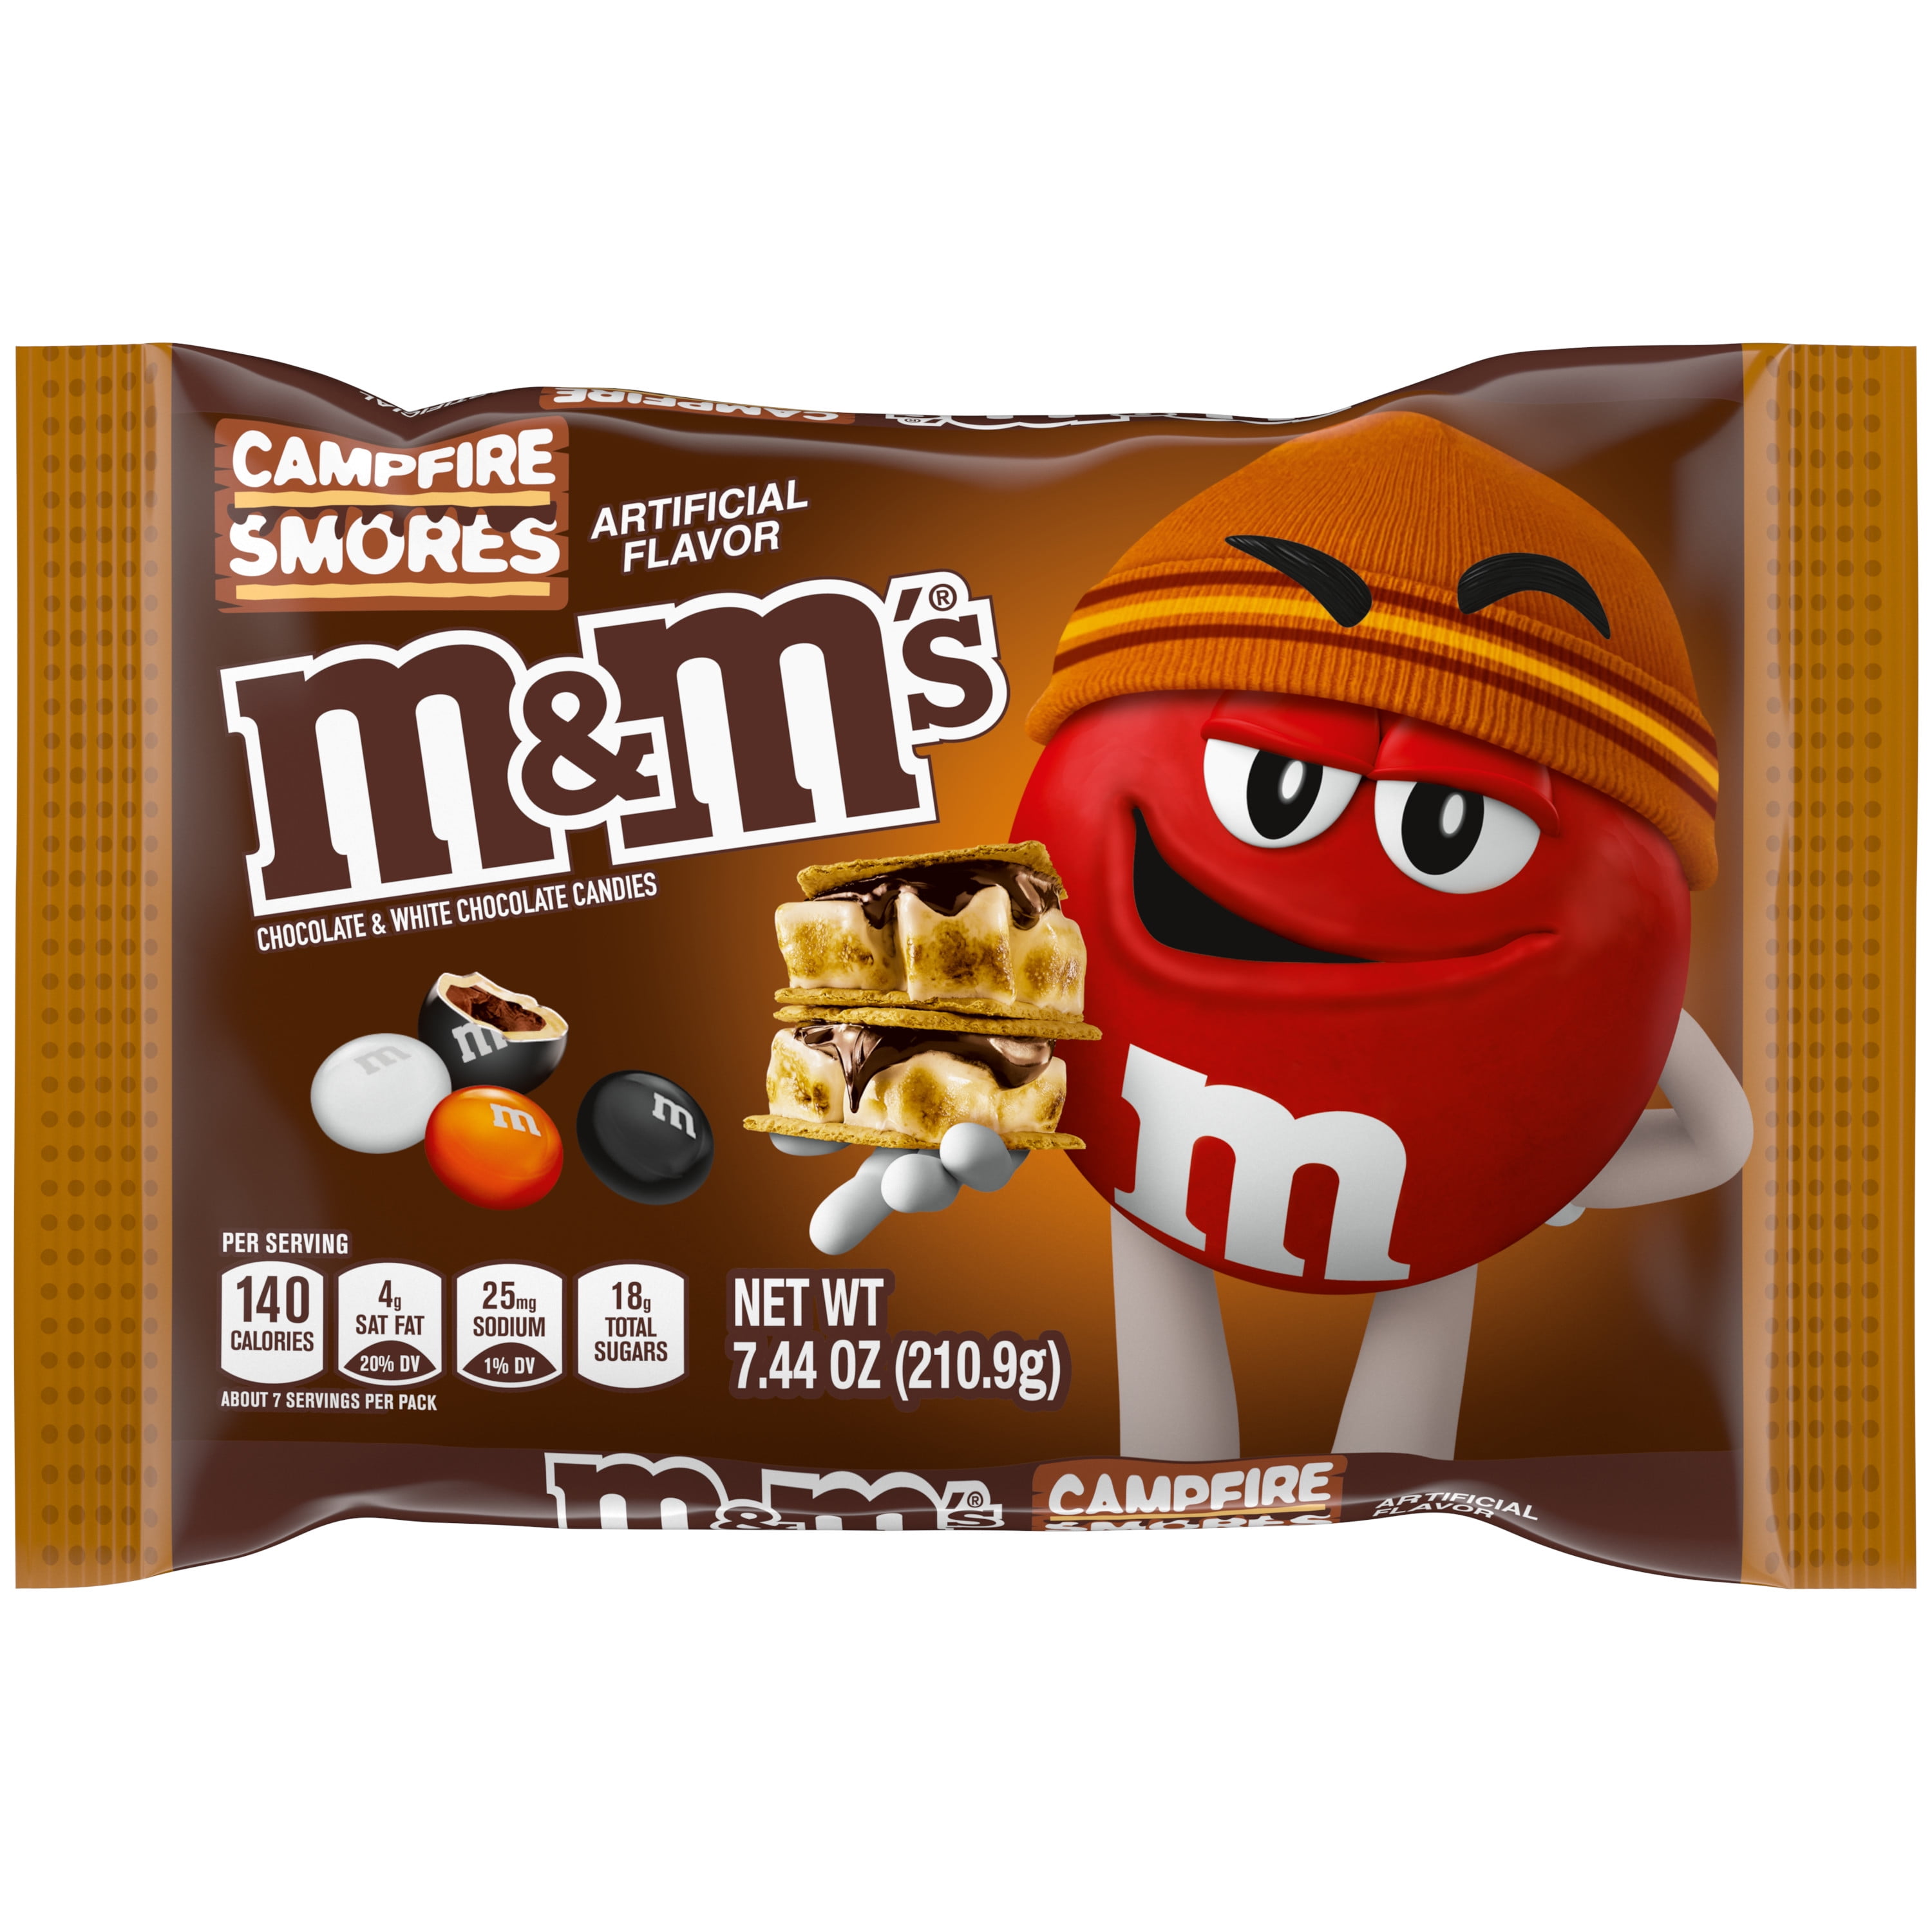  M&M'S Holiday Peanut Butter Milk Chocolate Candy Christmas  Assortment, 10 oz Bag : Grocery & Gourmet Food